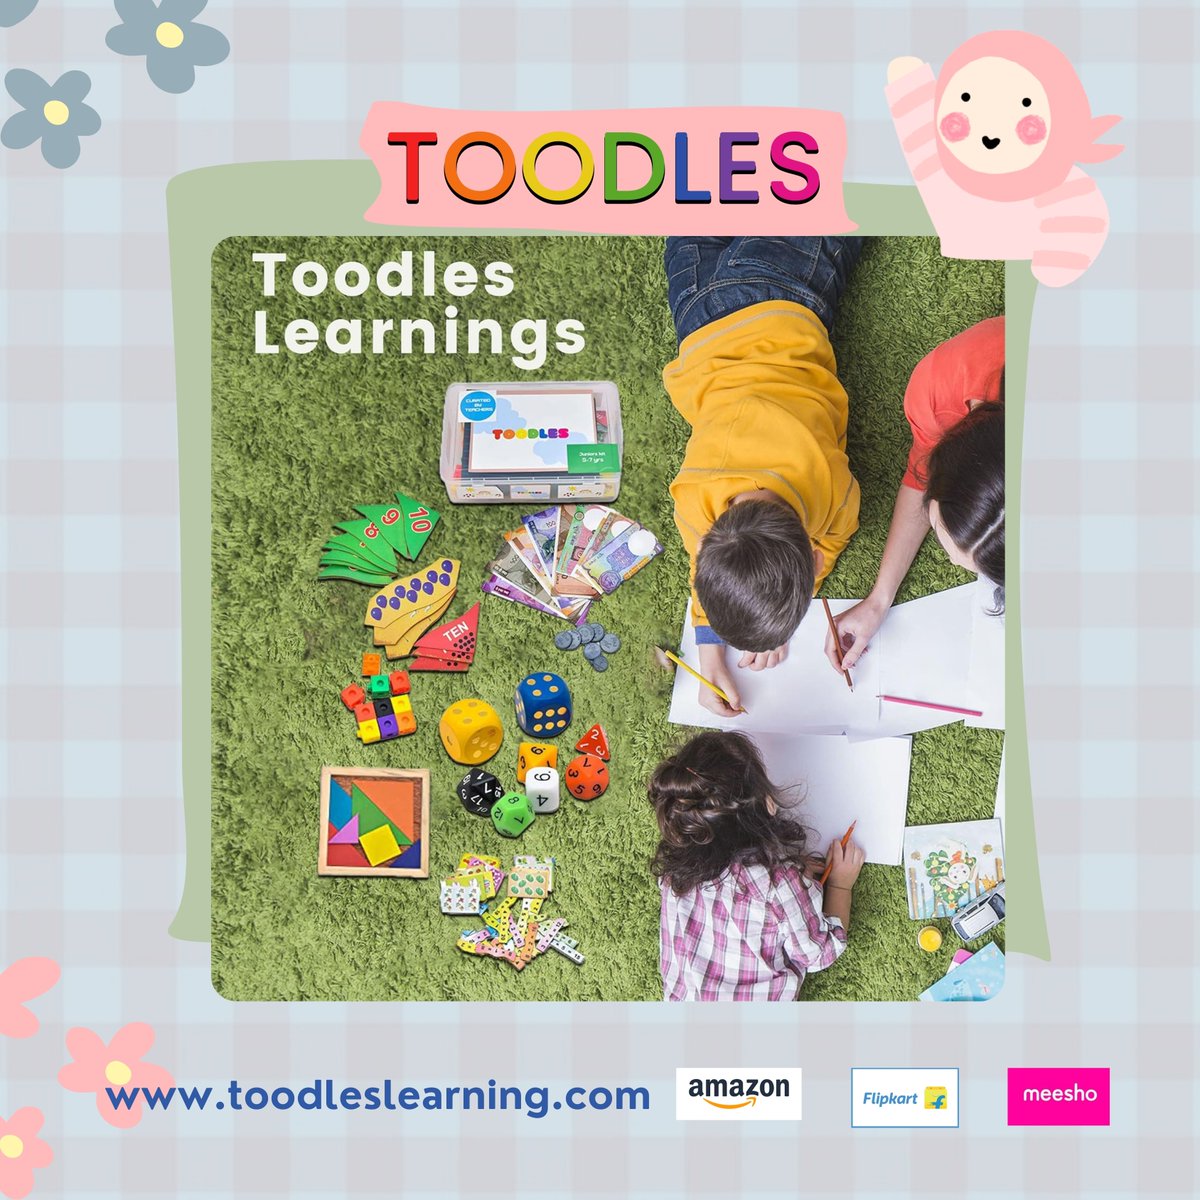 #toys
#play #fun #educationaltoys
#playsupport
#fingerpuppet #puzzles
#toodles #toodleslearning #toyland